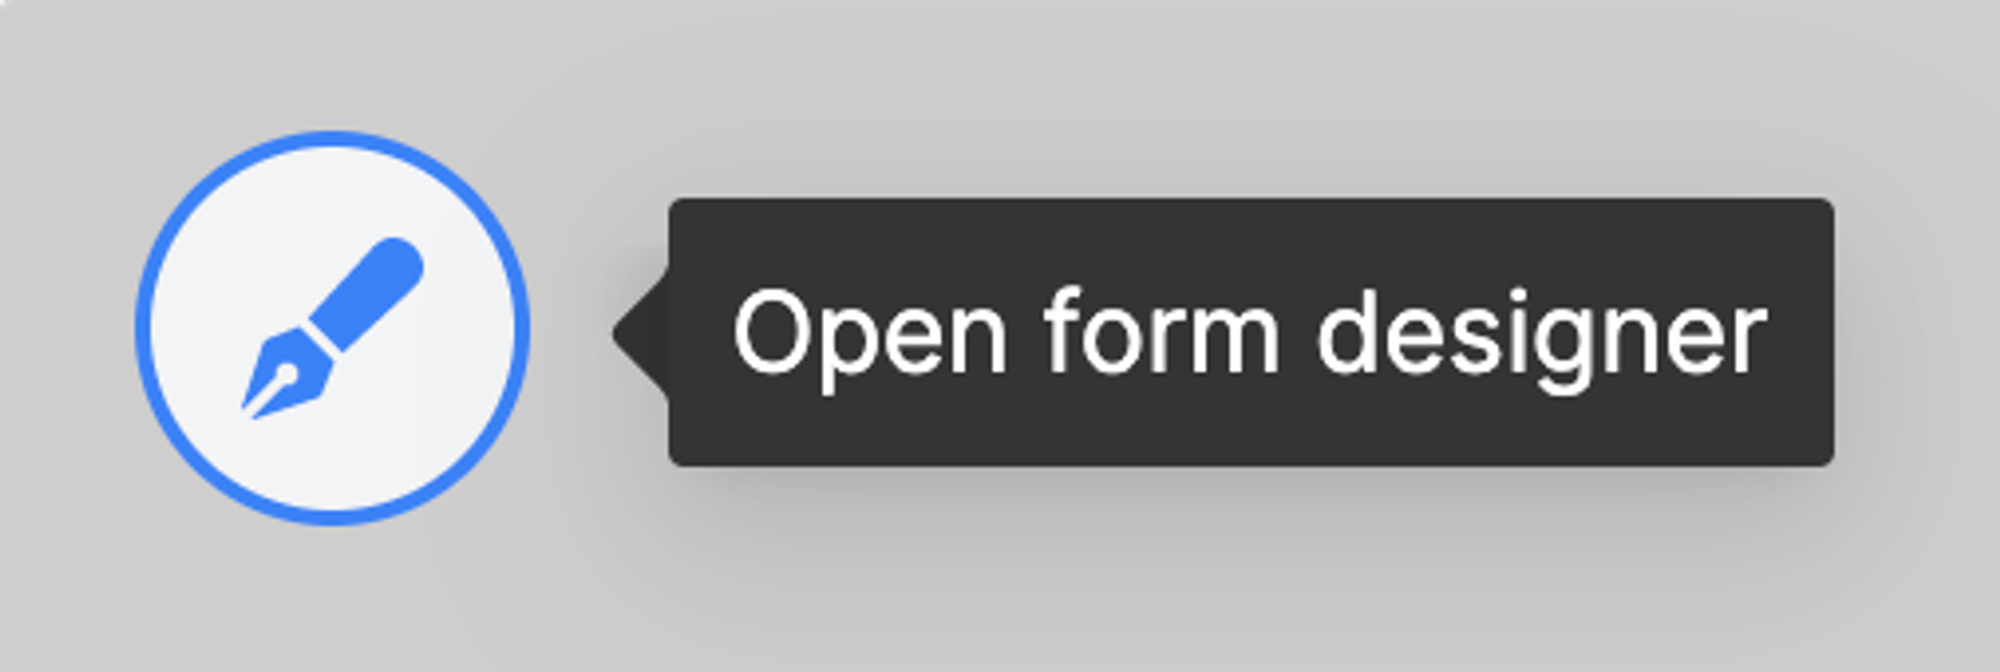 Button to open the form designer